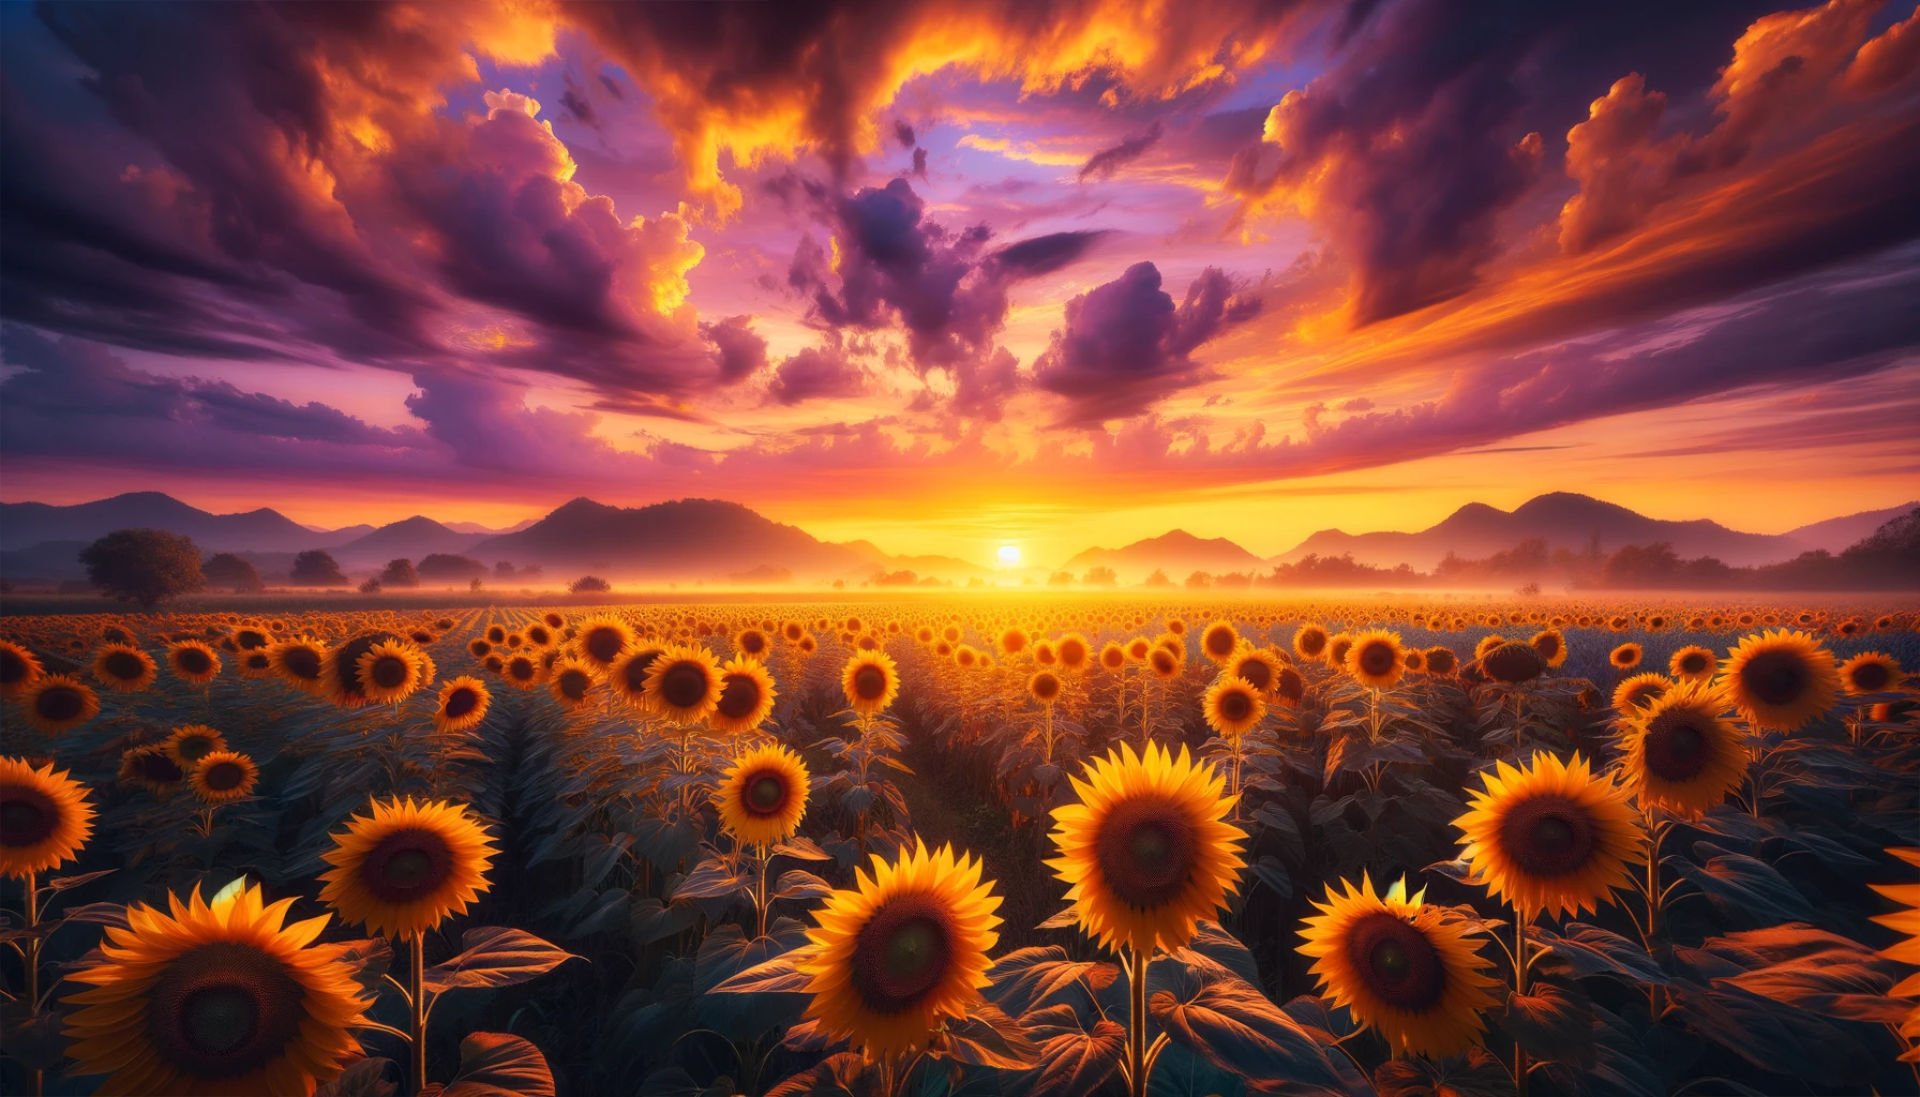 The image offers a cinematic and visually striking view of a sunflower field, set under a vibrant sky.